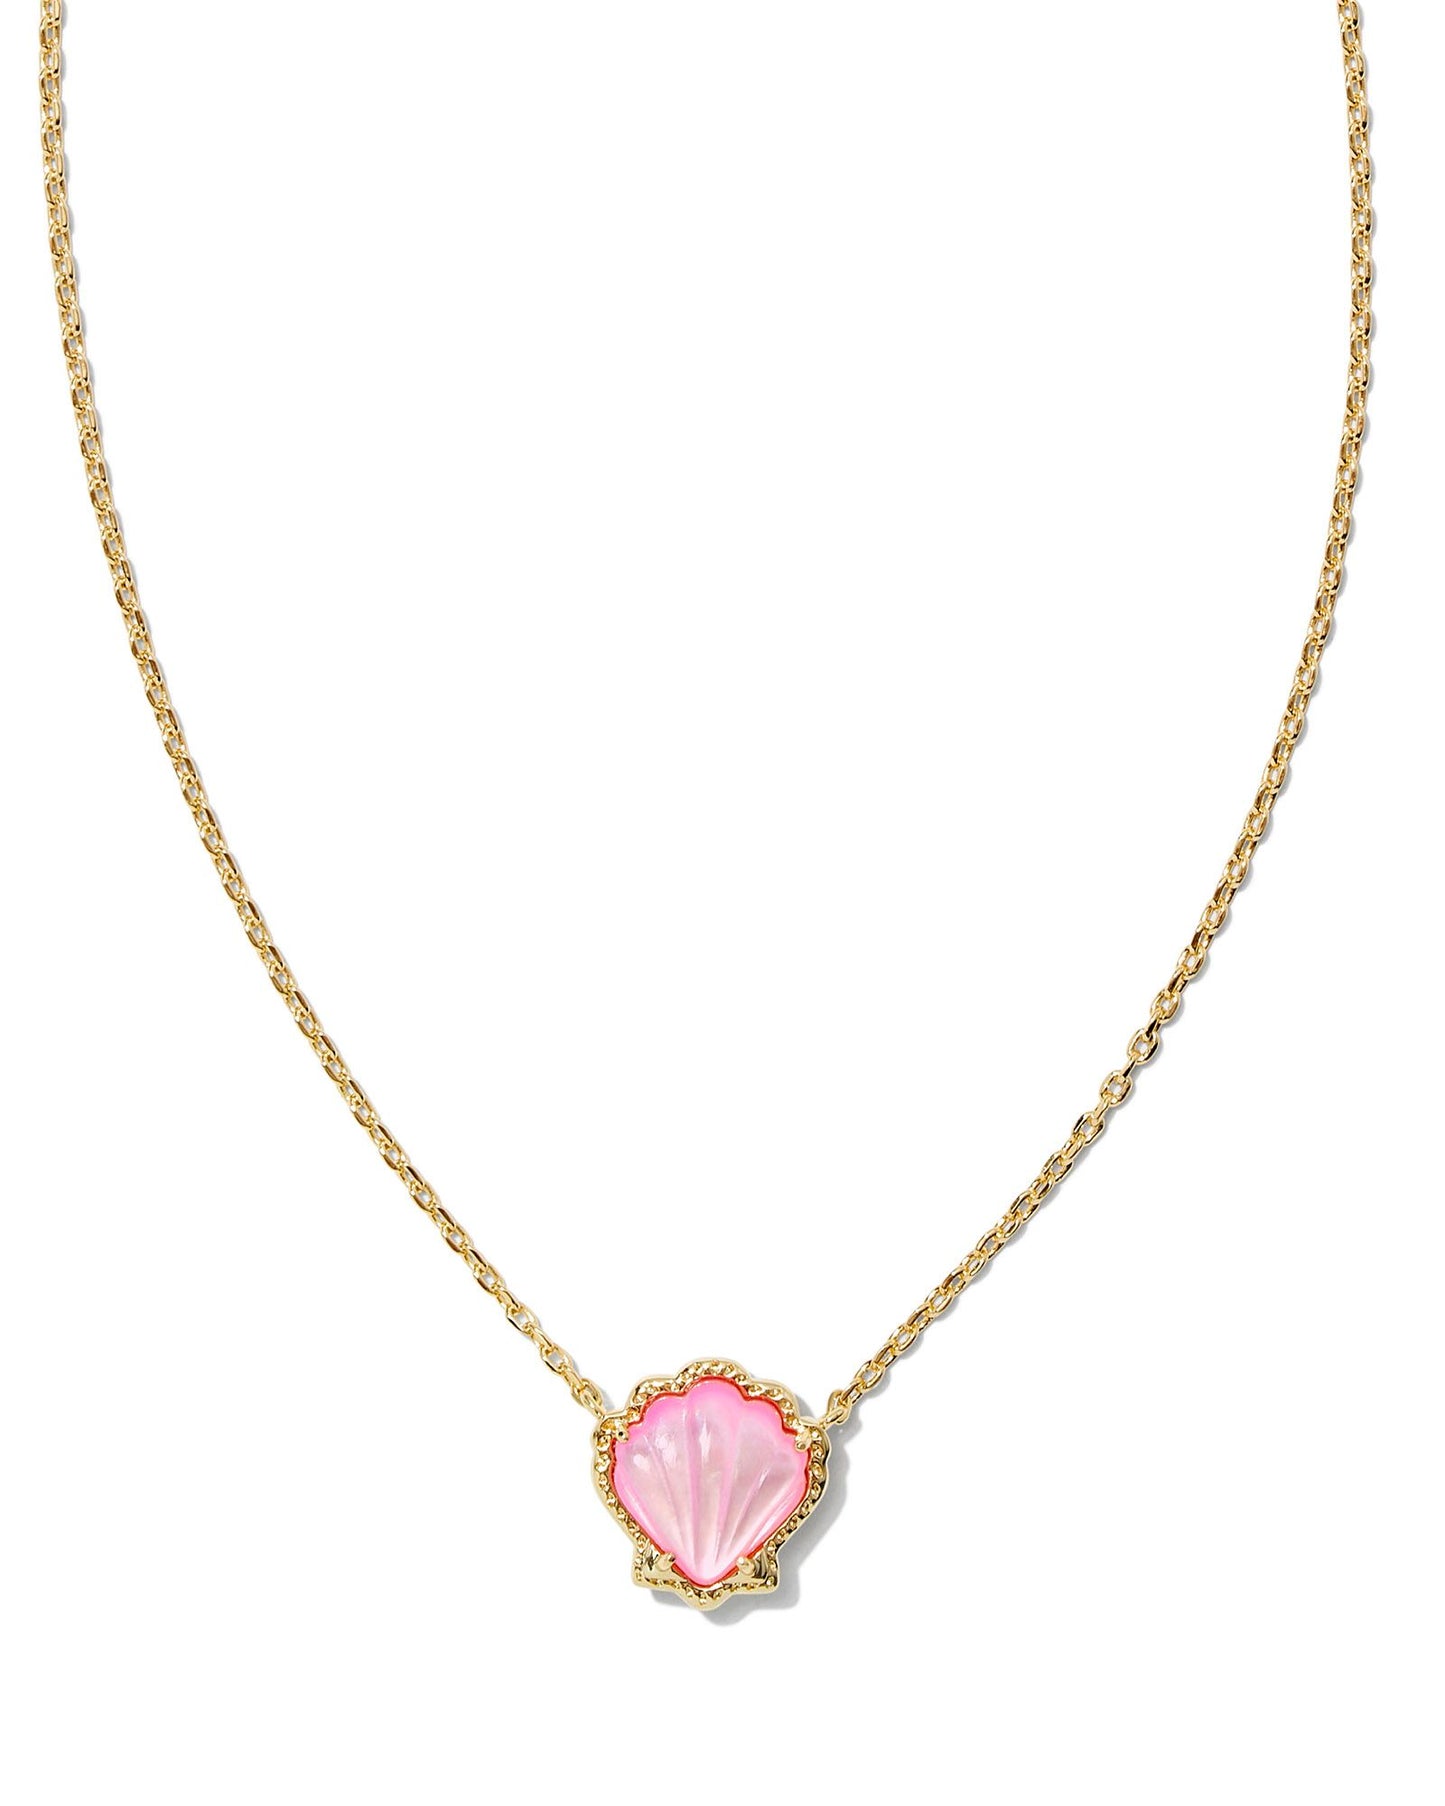 Brynne Gold Shell Short Pendant Necklace in Blush Ivory Mother of Pearl